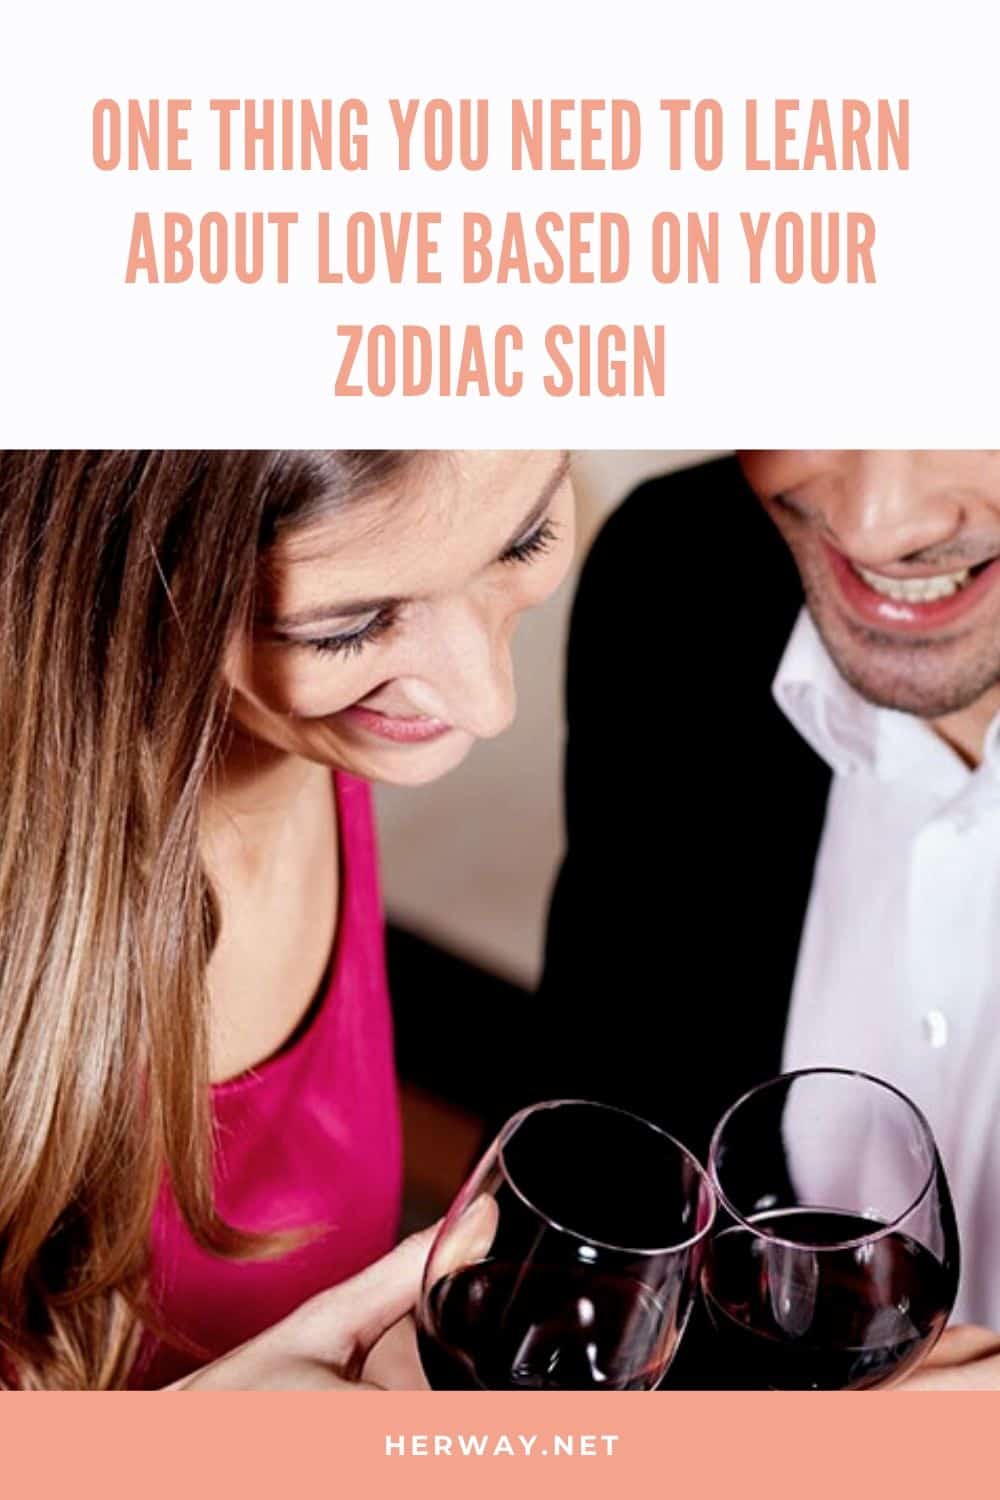 ONE THING YOU NEED TO LEARN ABOUT LOVE BASED ON YOUR ZODIAC SIGN